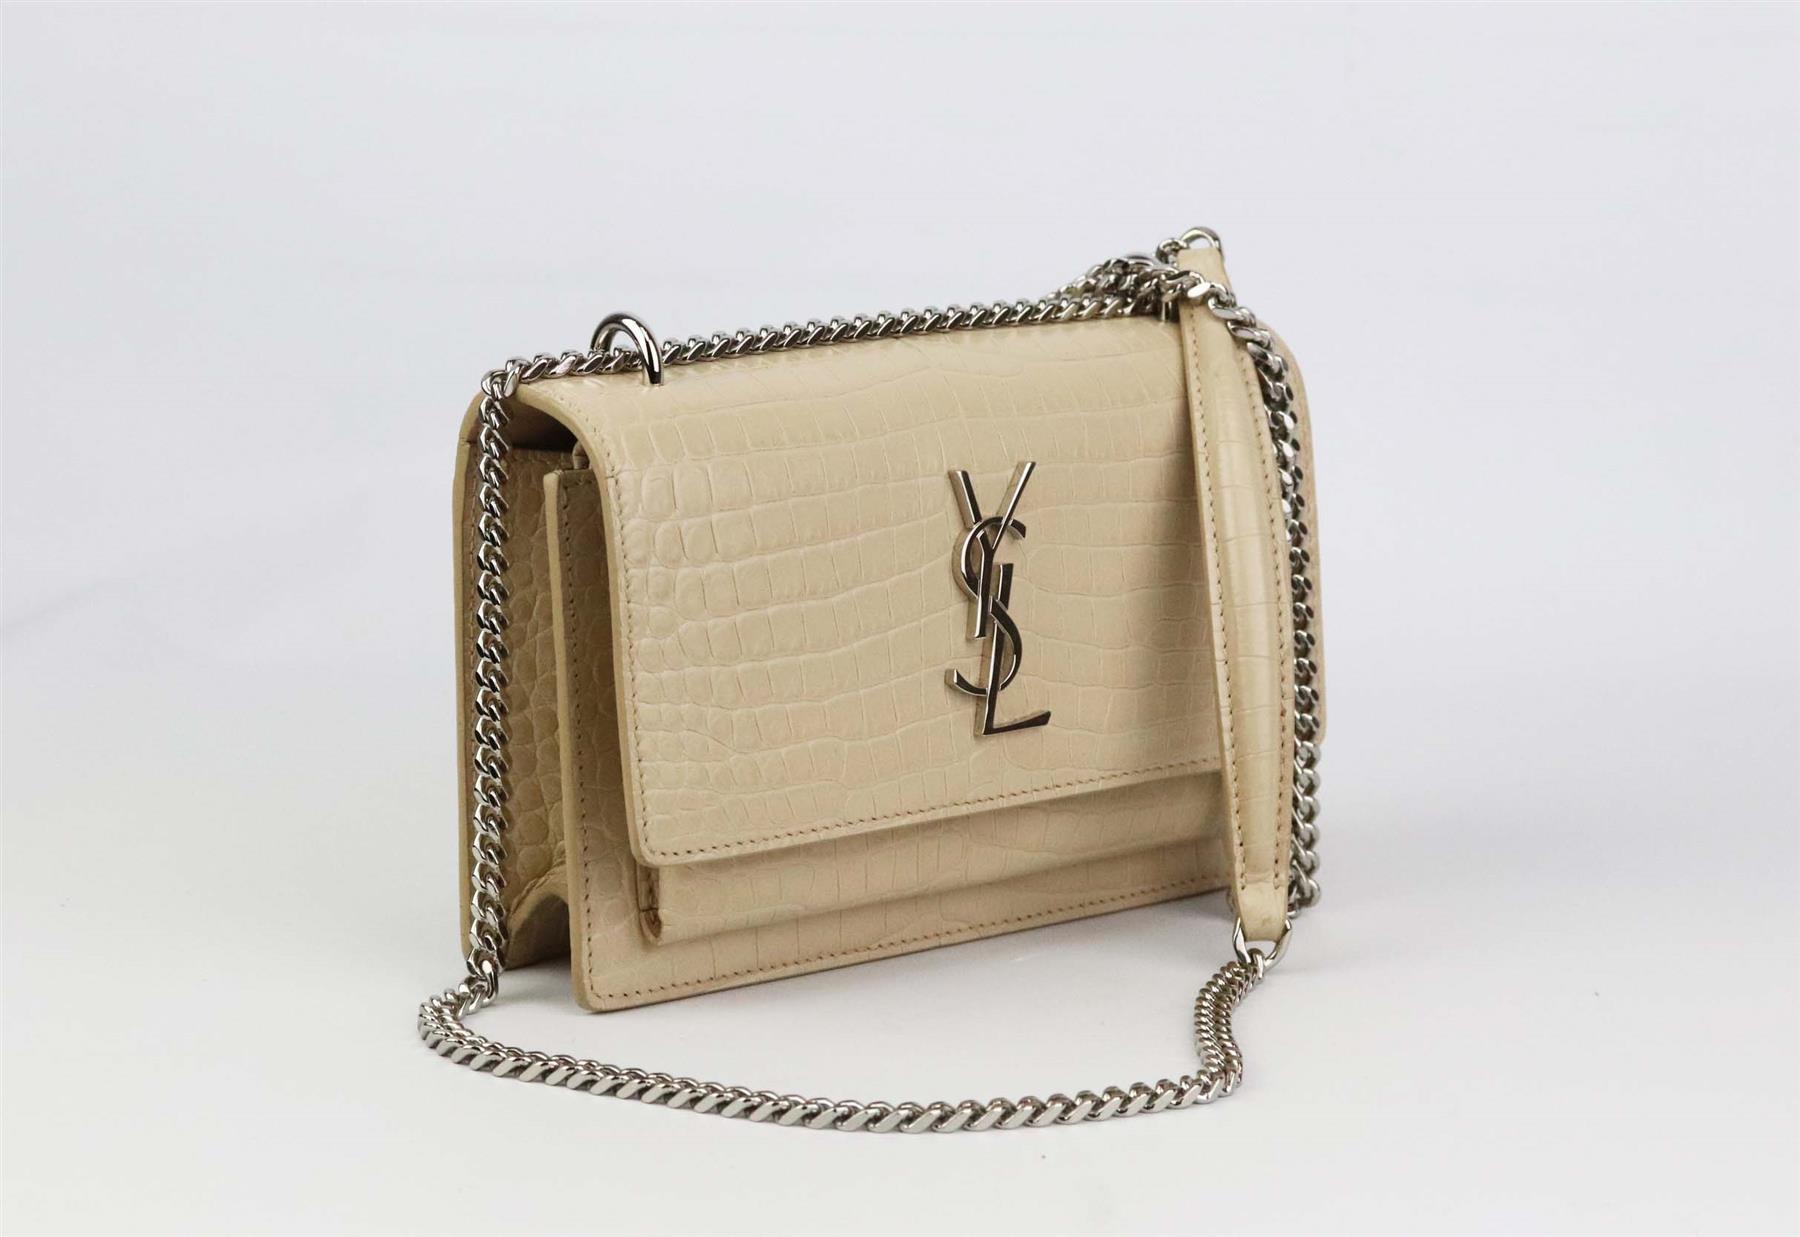 Saint Laurent's 'Sunset' shoulder bag is made from matte beige croc-effect leather, accented with the signature 'YSL' emblem, it opens to reveal a compartmentalized interior with plenty of slots, the silver chain strap can be doubled over or worn